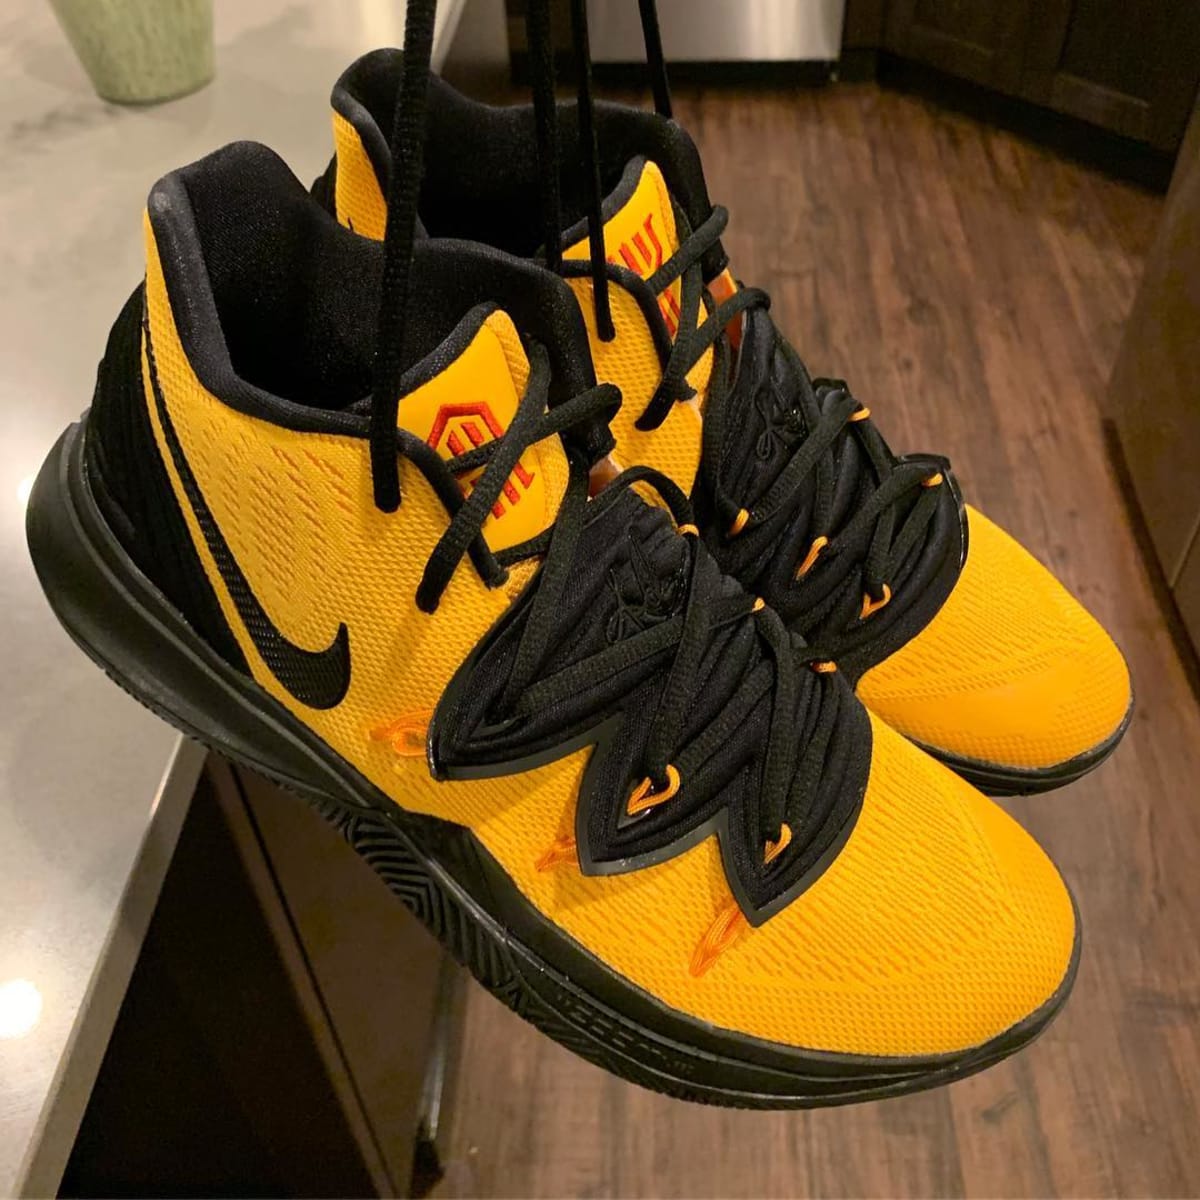 NIKEiD Kyrie 5 Bruce Lee - NIKEiD By You Kyrie 5 Designs | Sole Collector